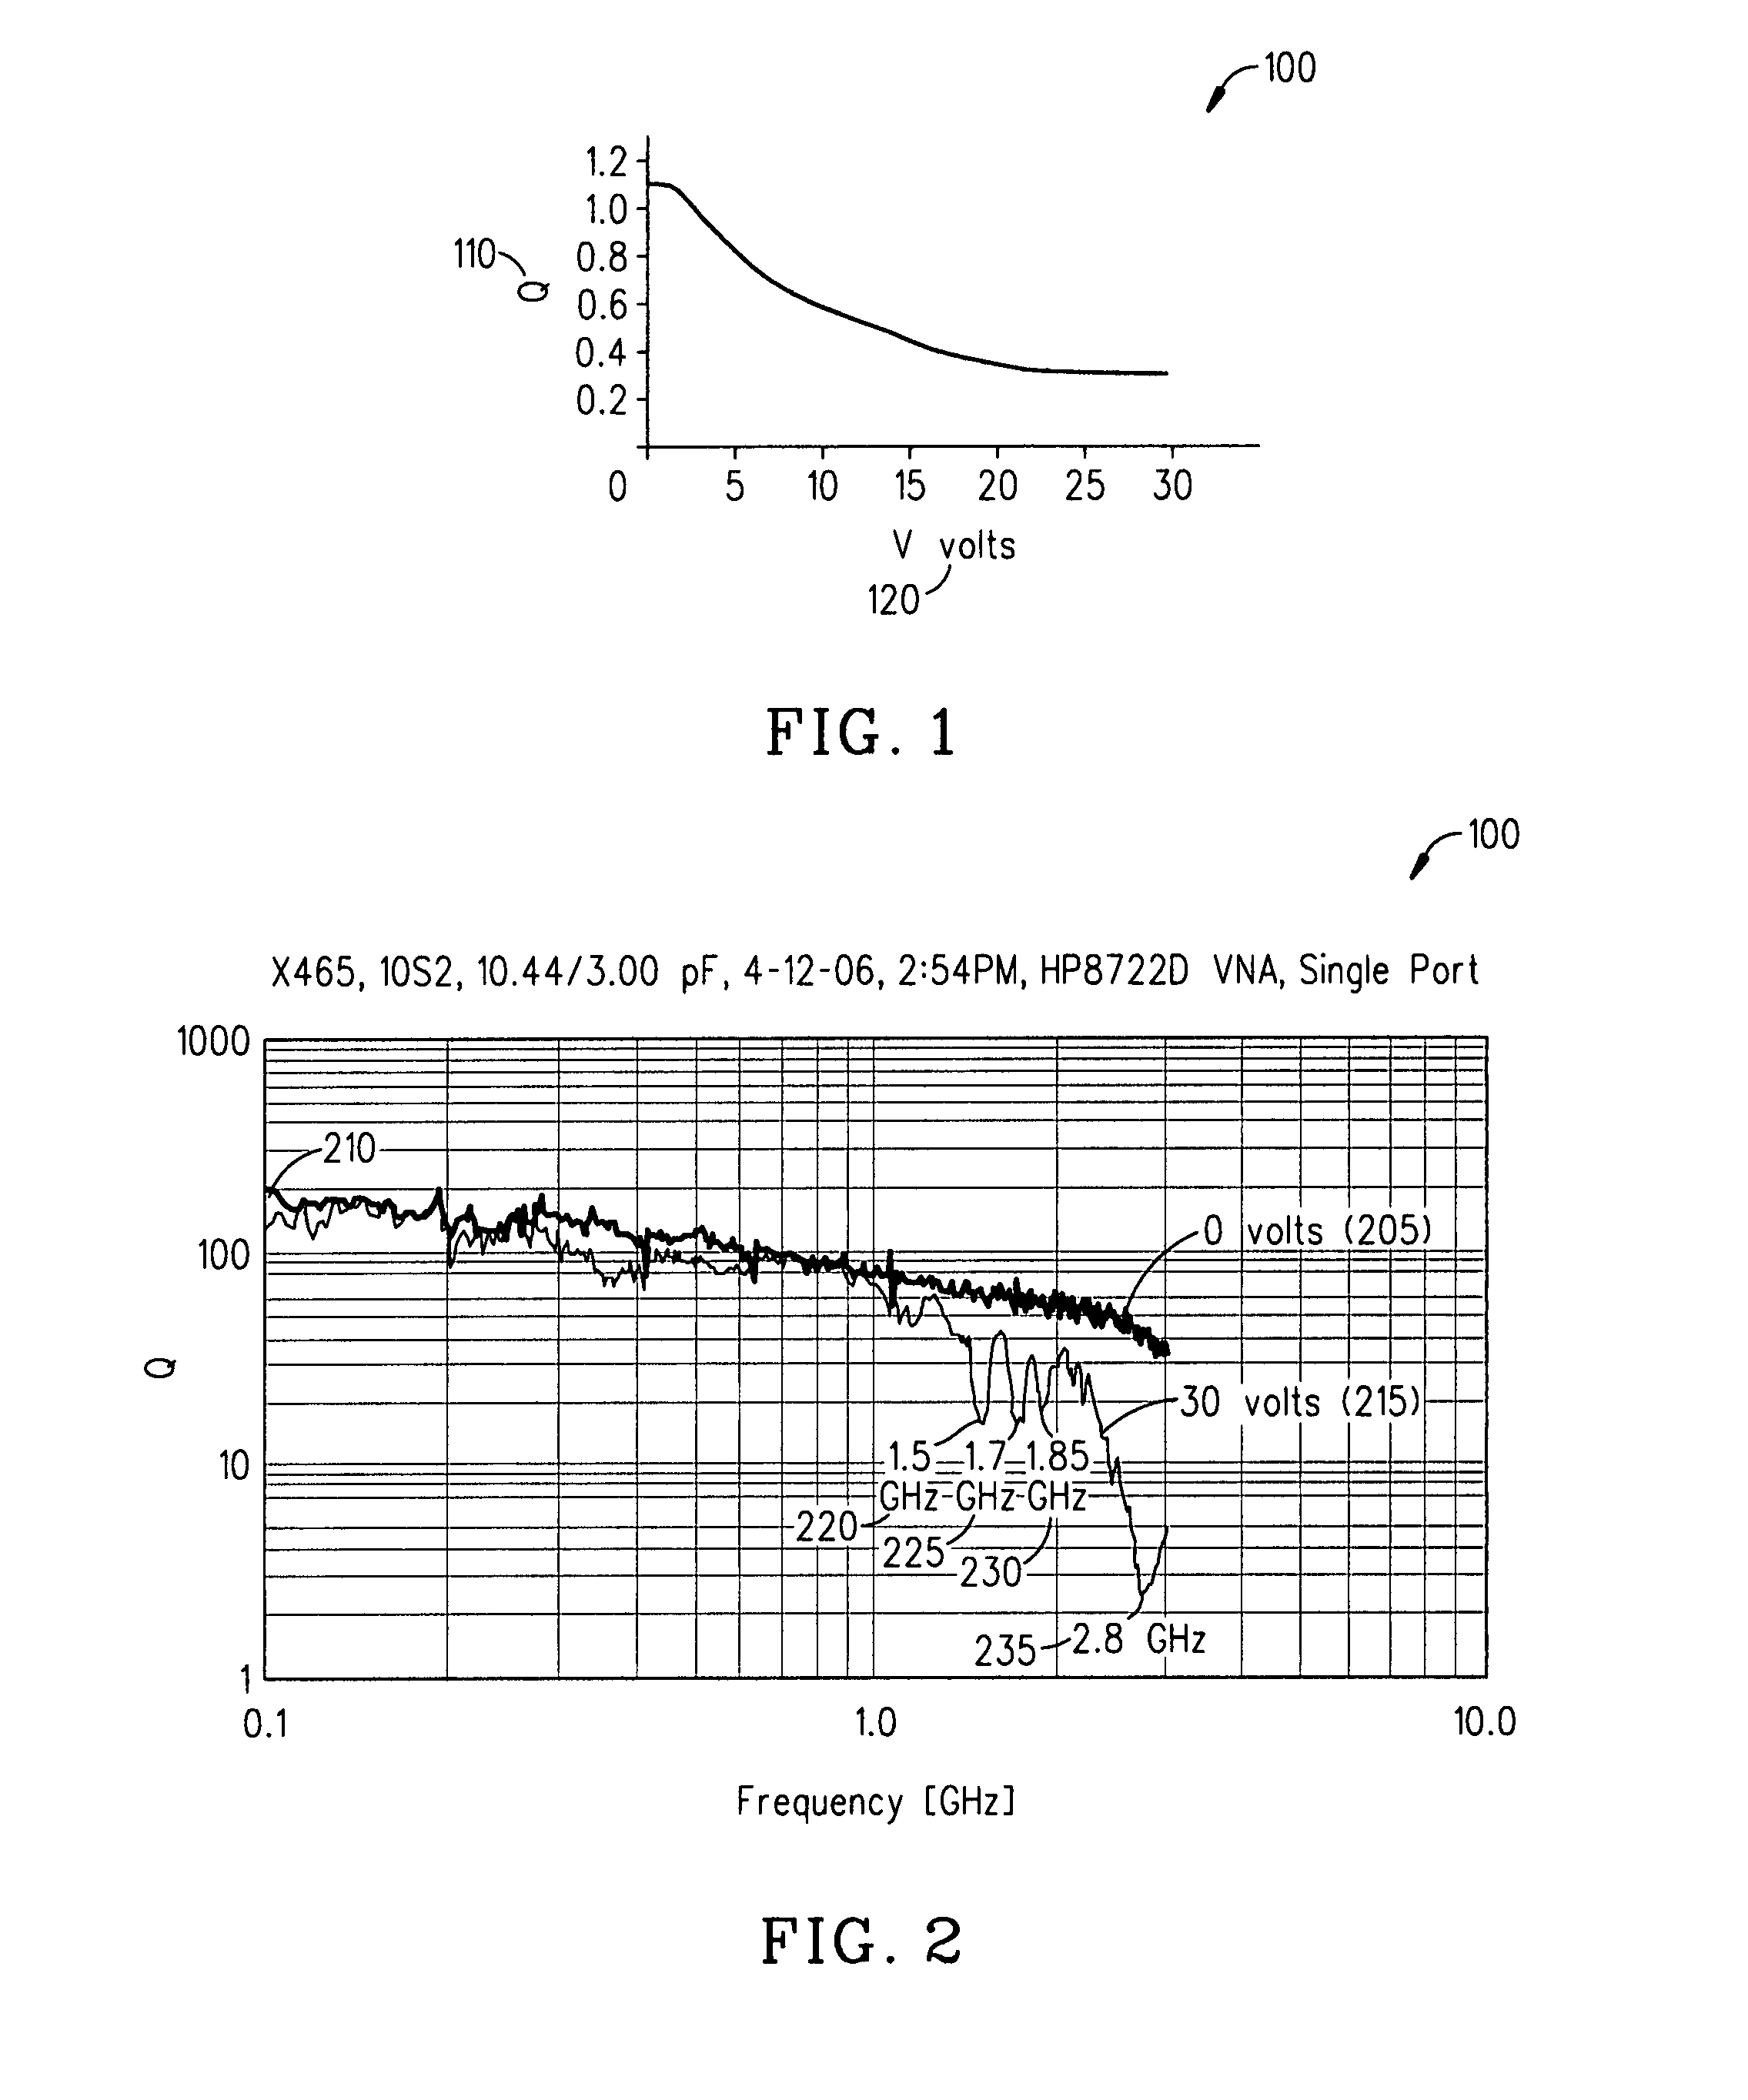 Capacitors adapted for acoustic resonance cancellation